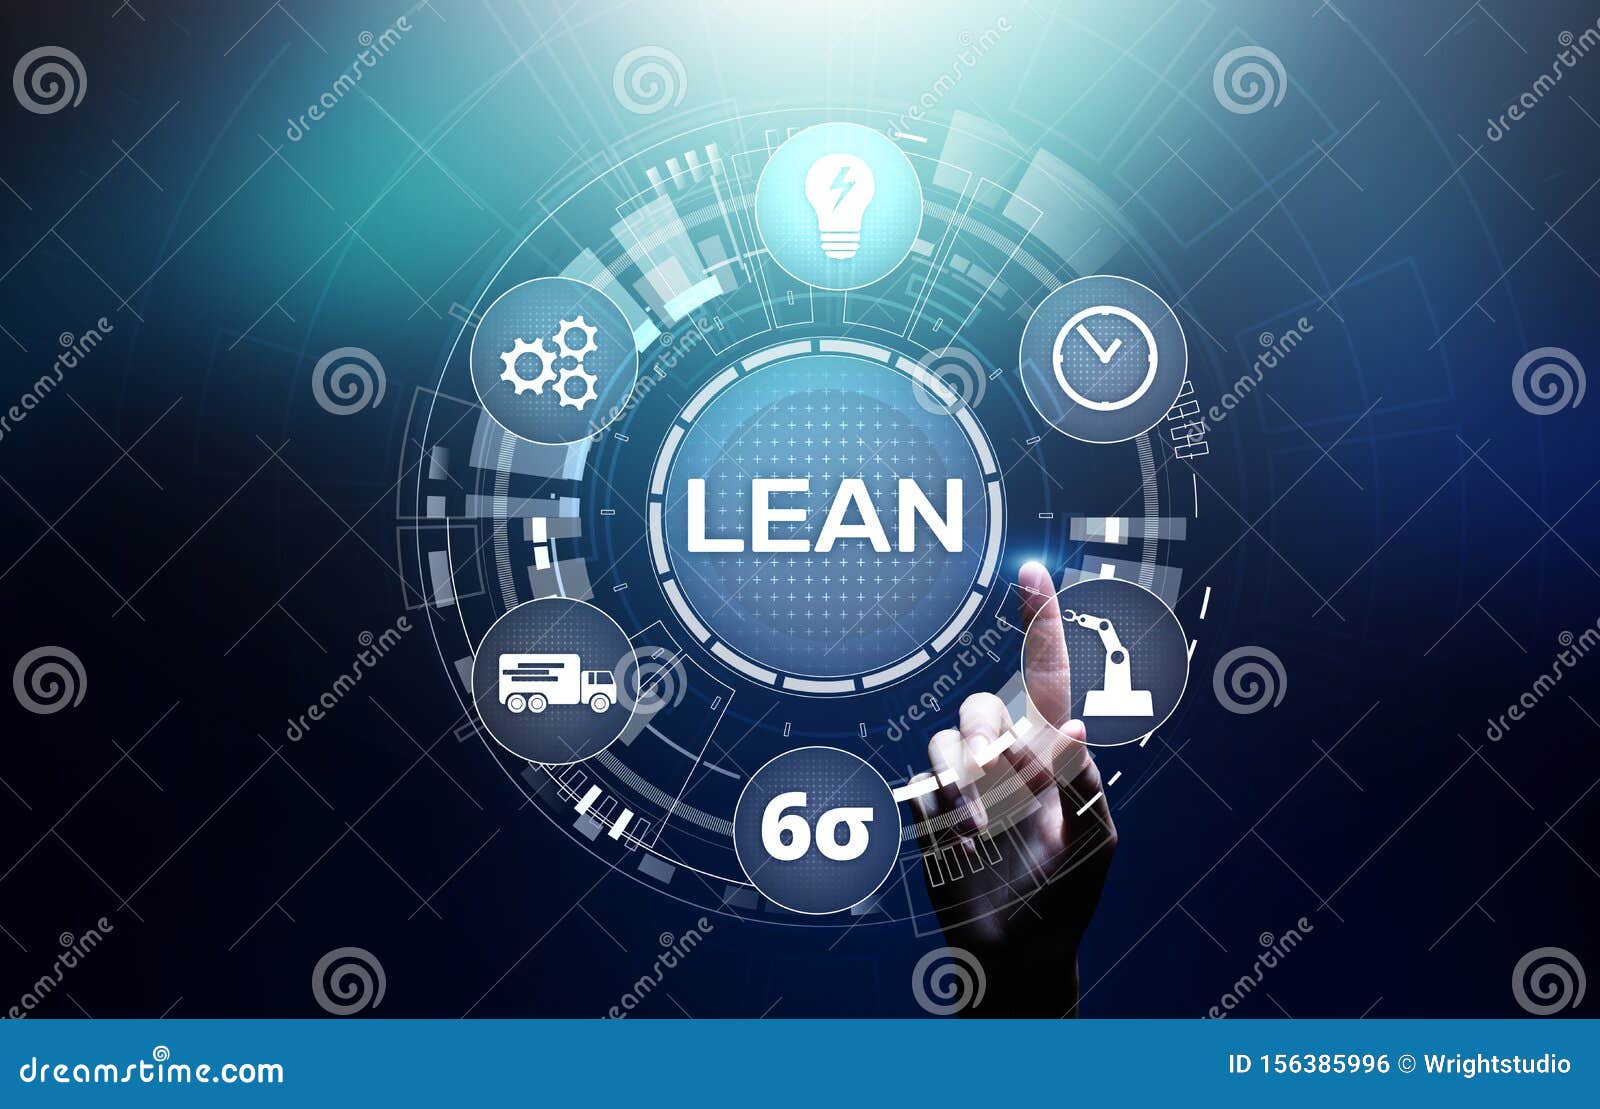 Lean Six Sigma Smart Industry Quality Control Standardization Lean Manufacturing Dmaic 5452